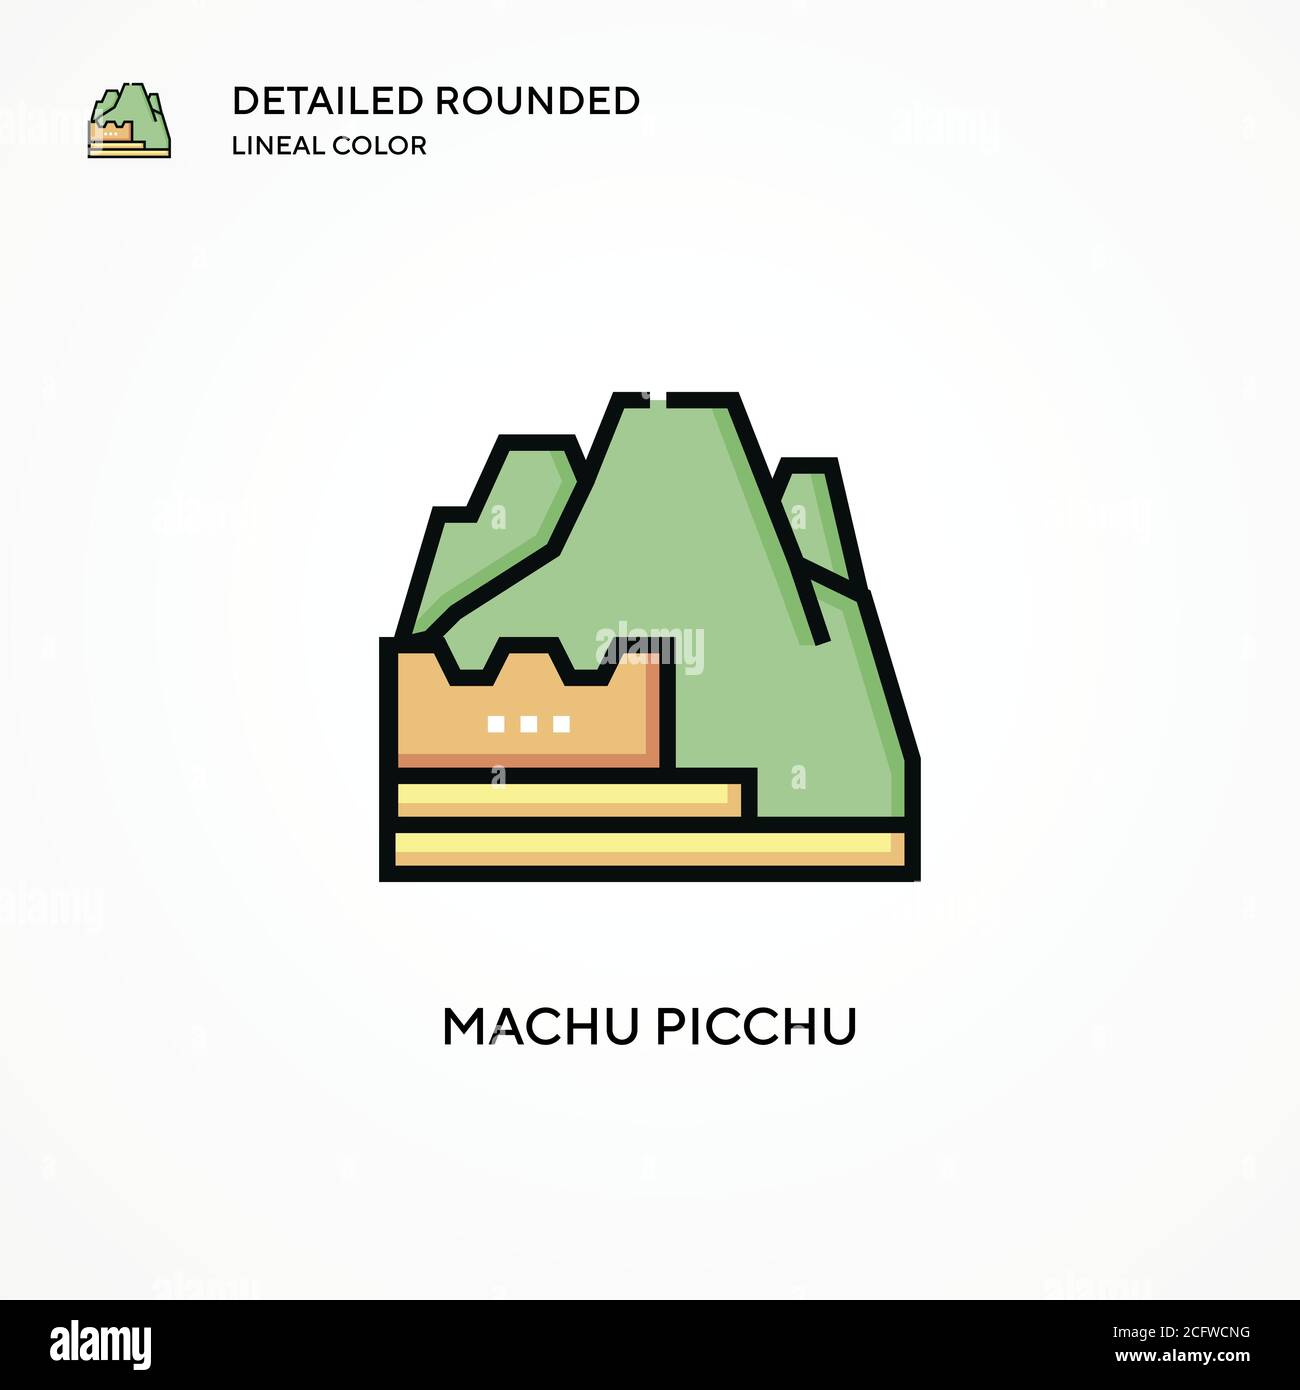 Machu picchu vector icon. Modern vector illustration concepts. Easy to edit and customize. Stock Vector